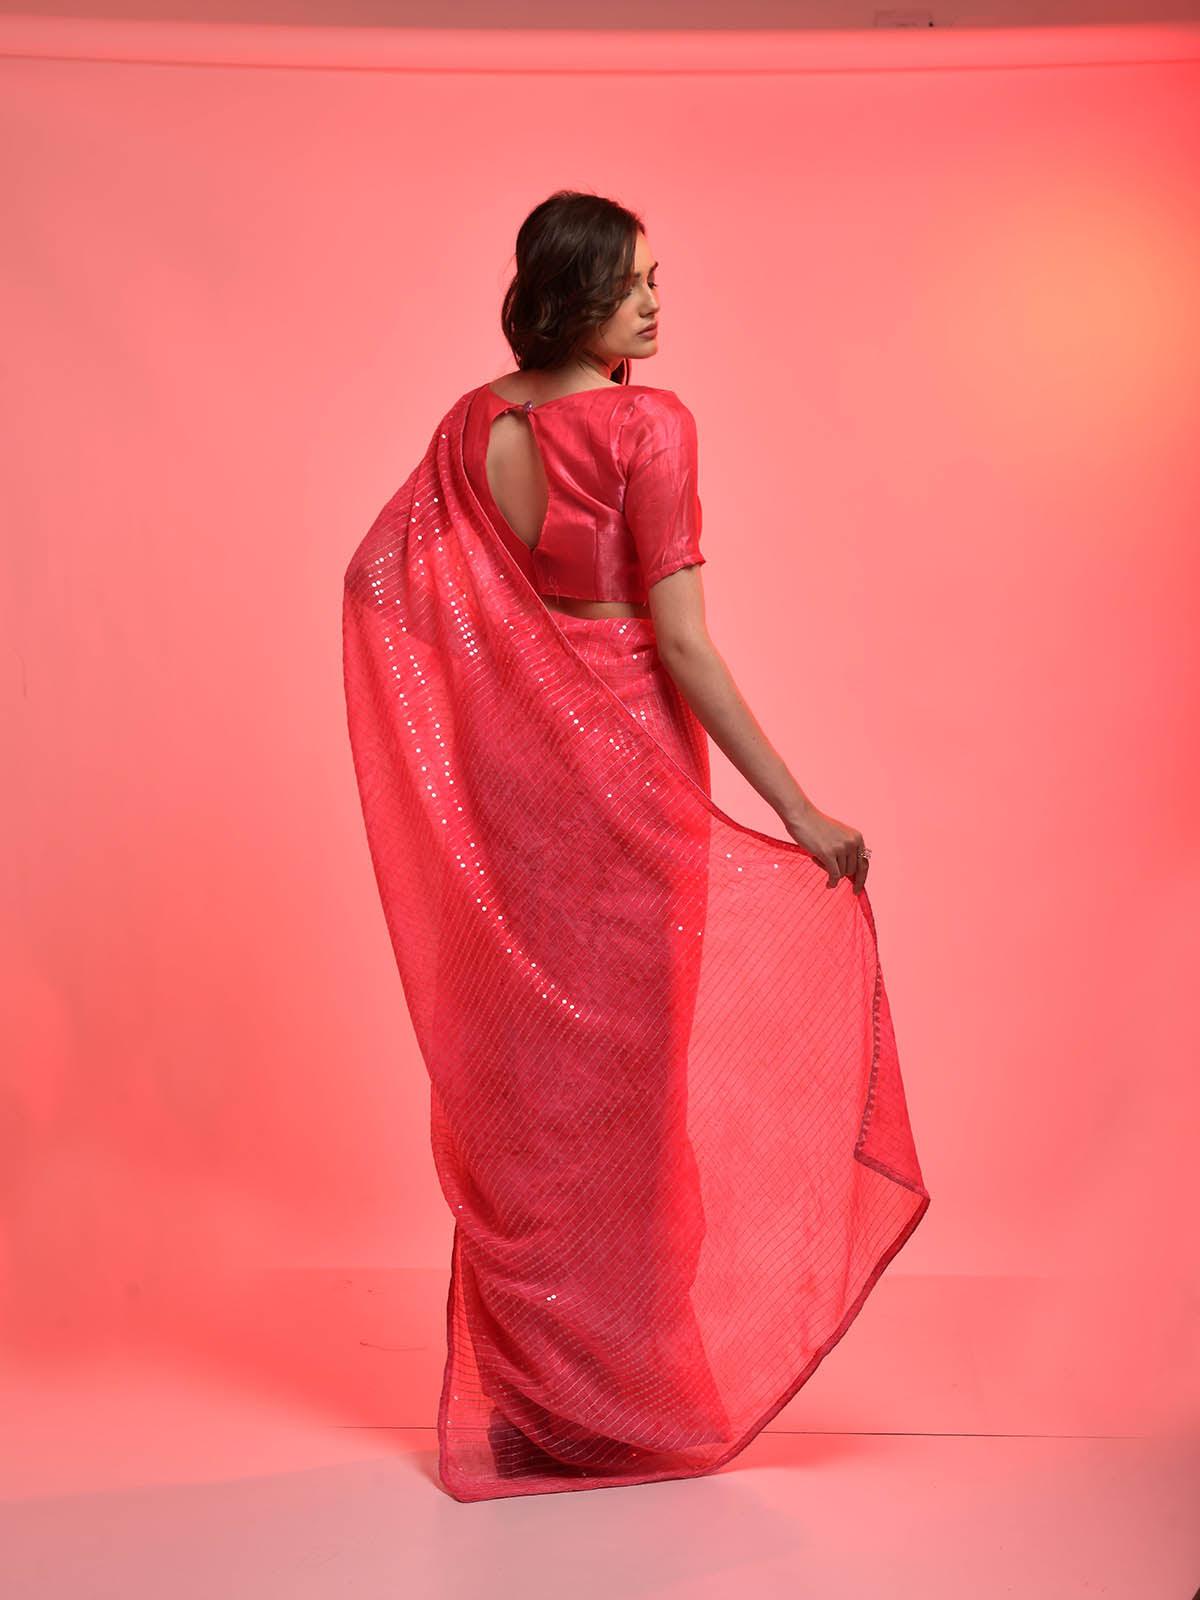 Pink Chiffon Sequins Embroidered Saree - Odette